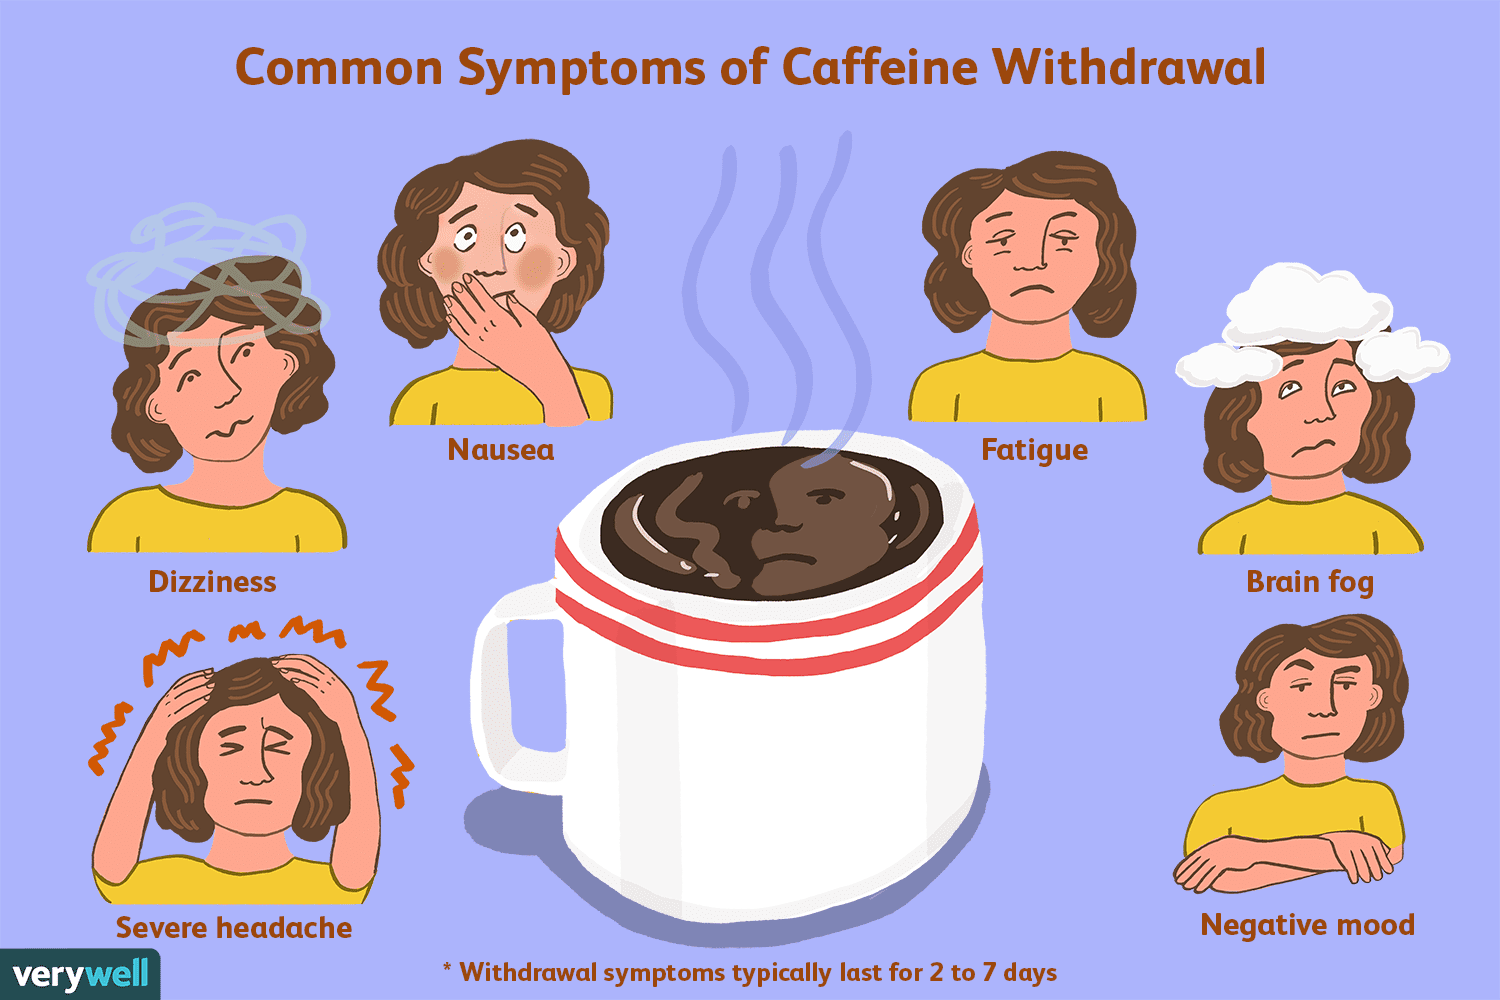 Can Caffeine Withdrawal Cause Fatigue?